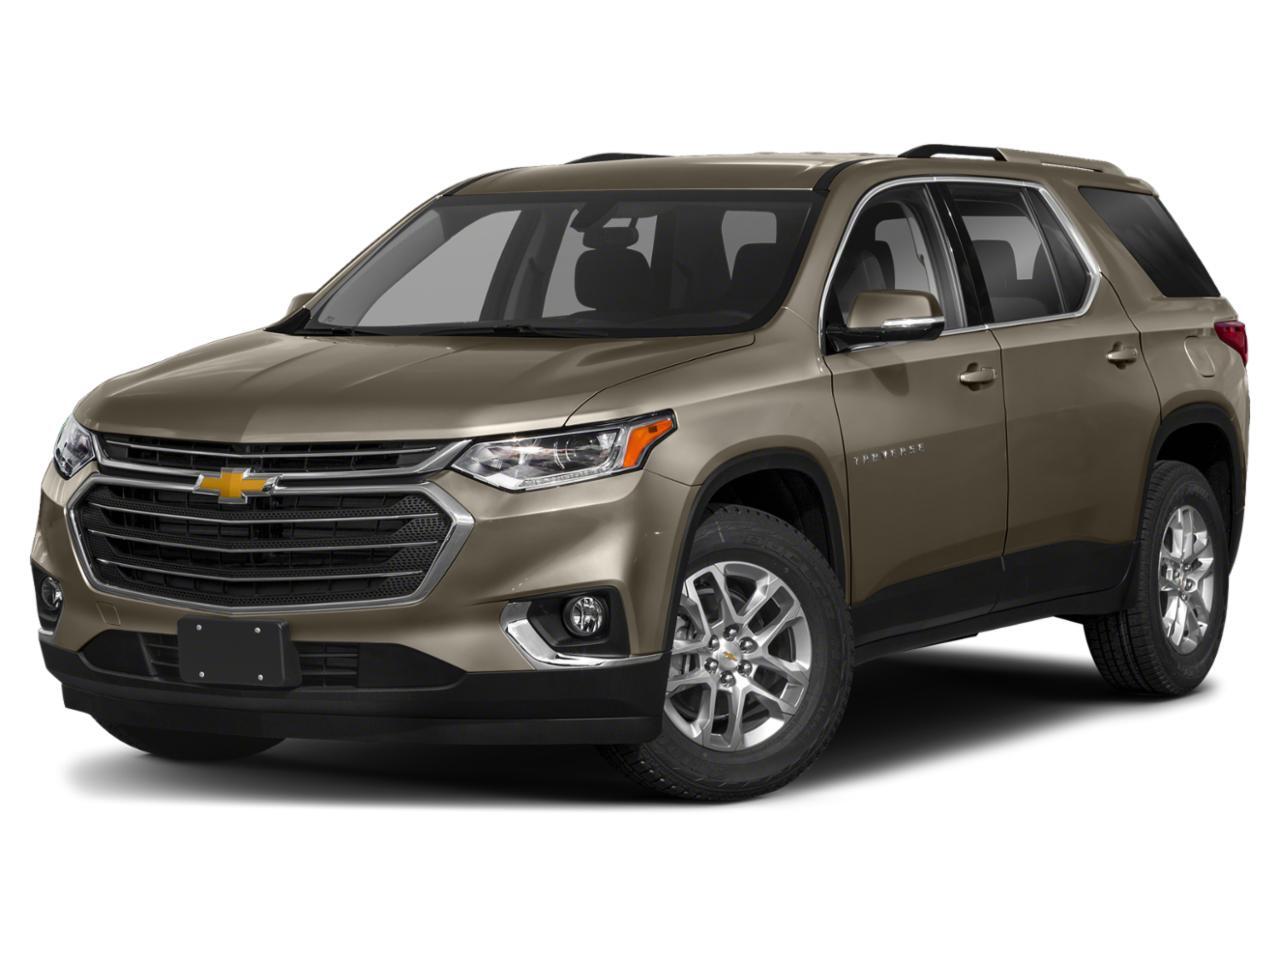 2018 Chevrolet Traverse LT/Trailering Package,Surround Vision Cam,Sunroof